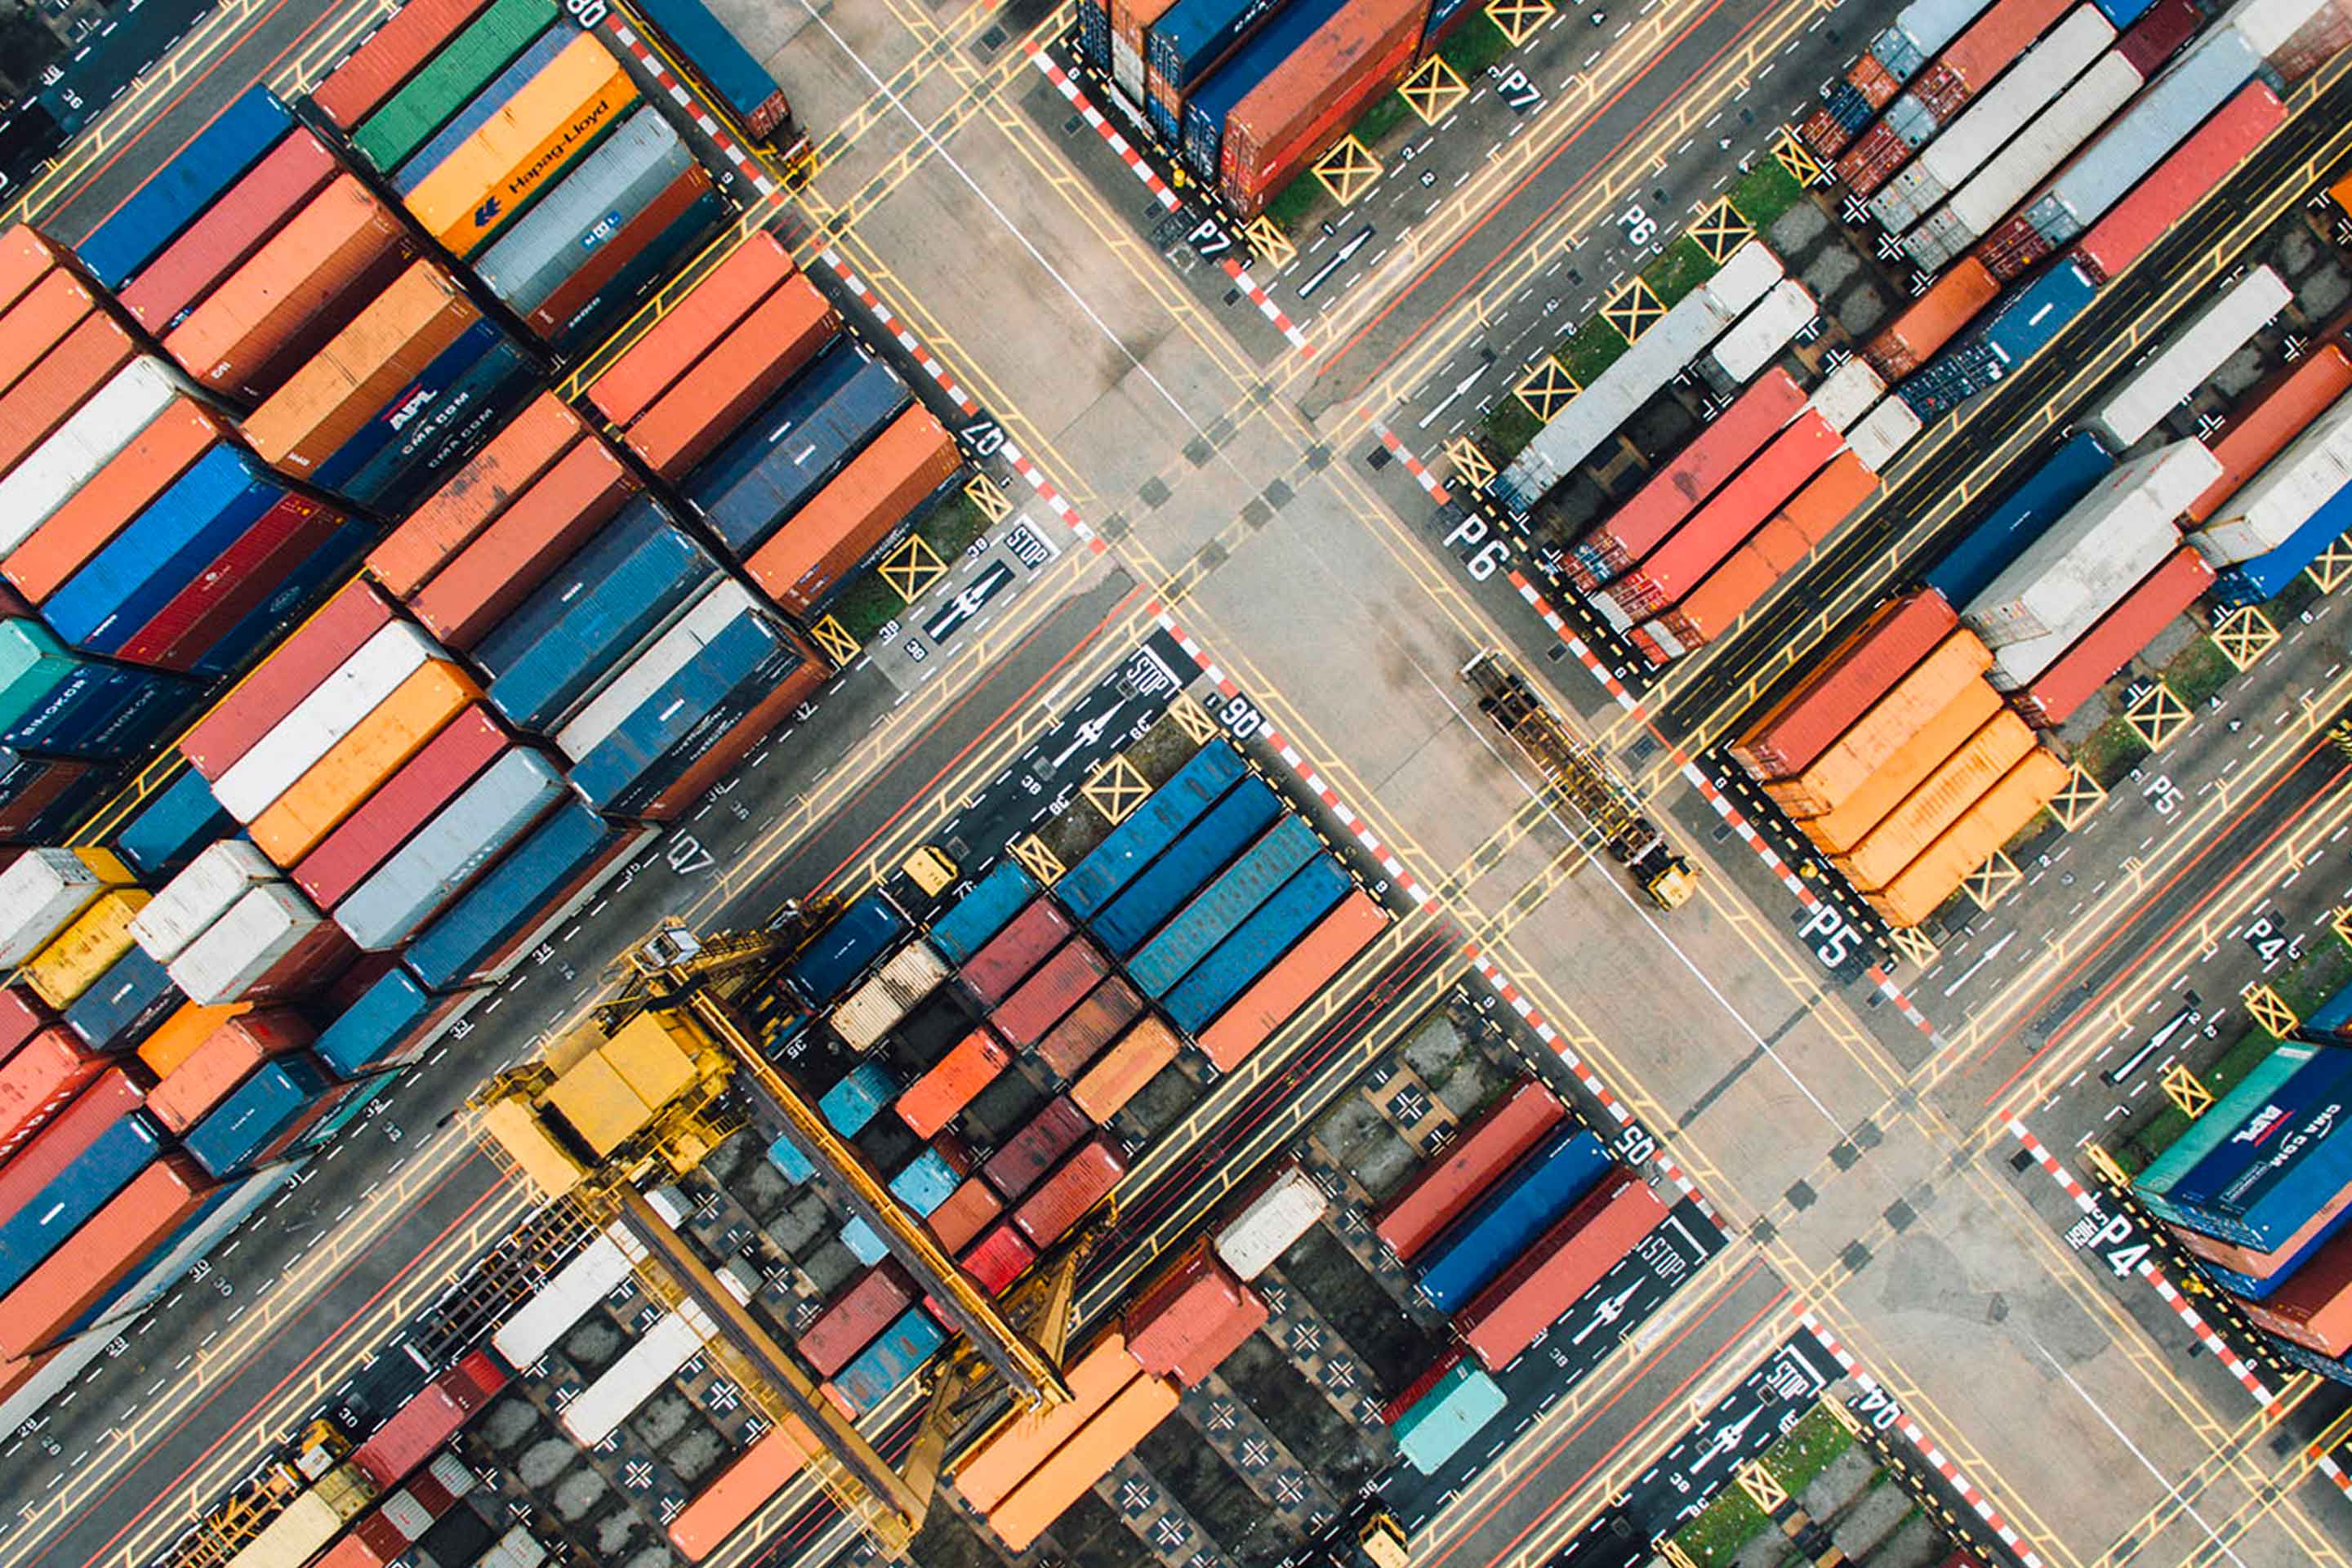 An aerial view of containers in a yard